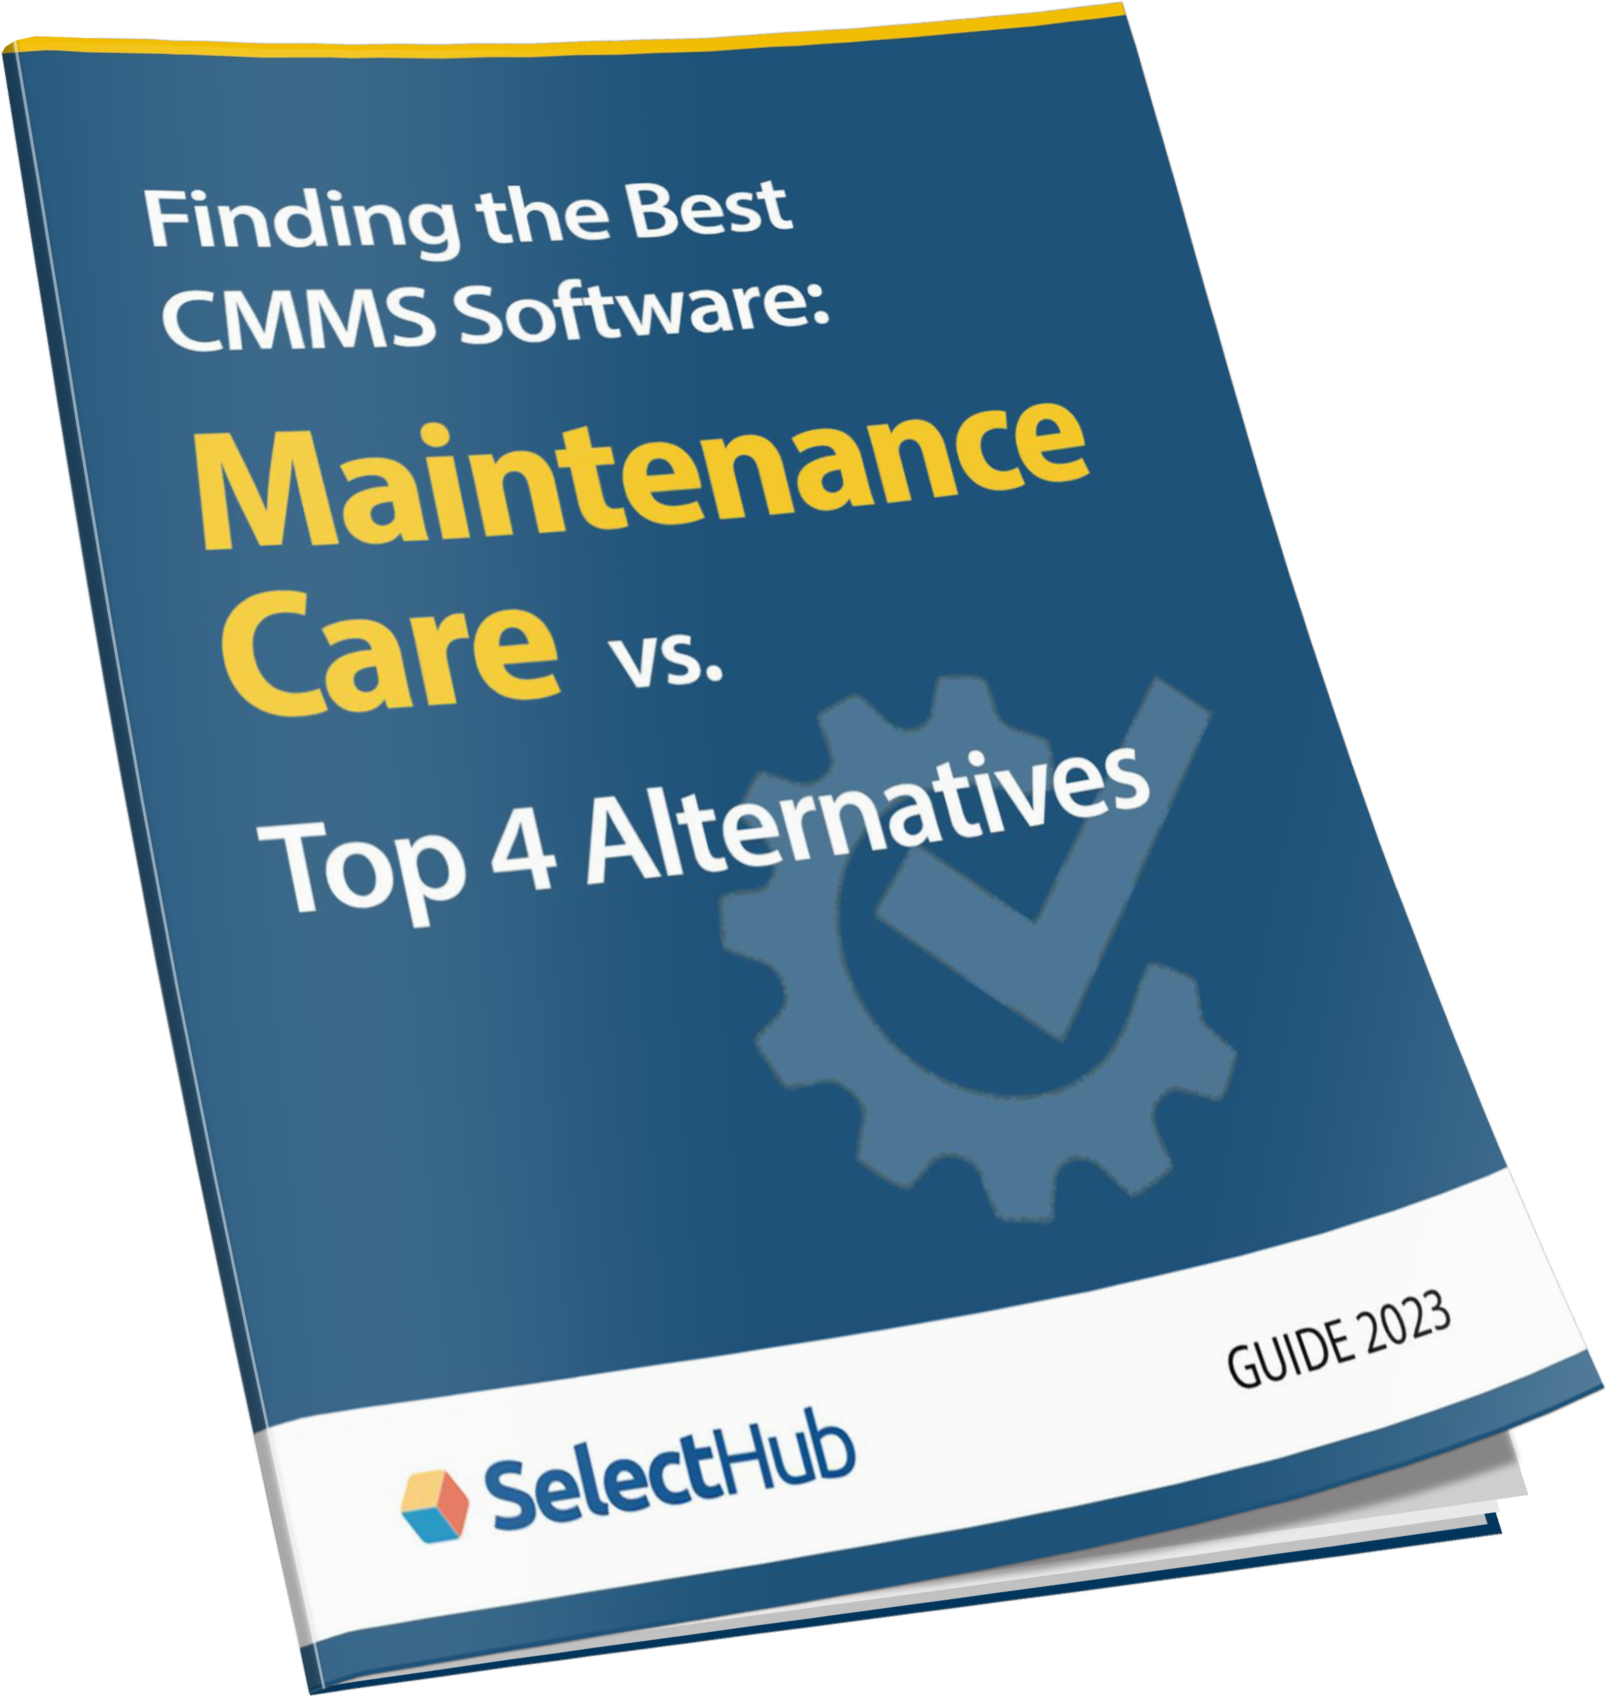 finding the best CMMS software guide cover